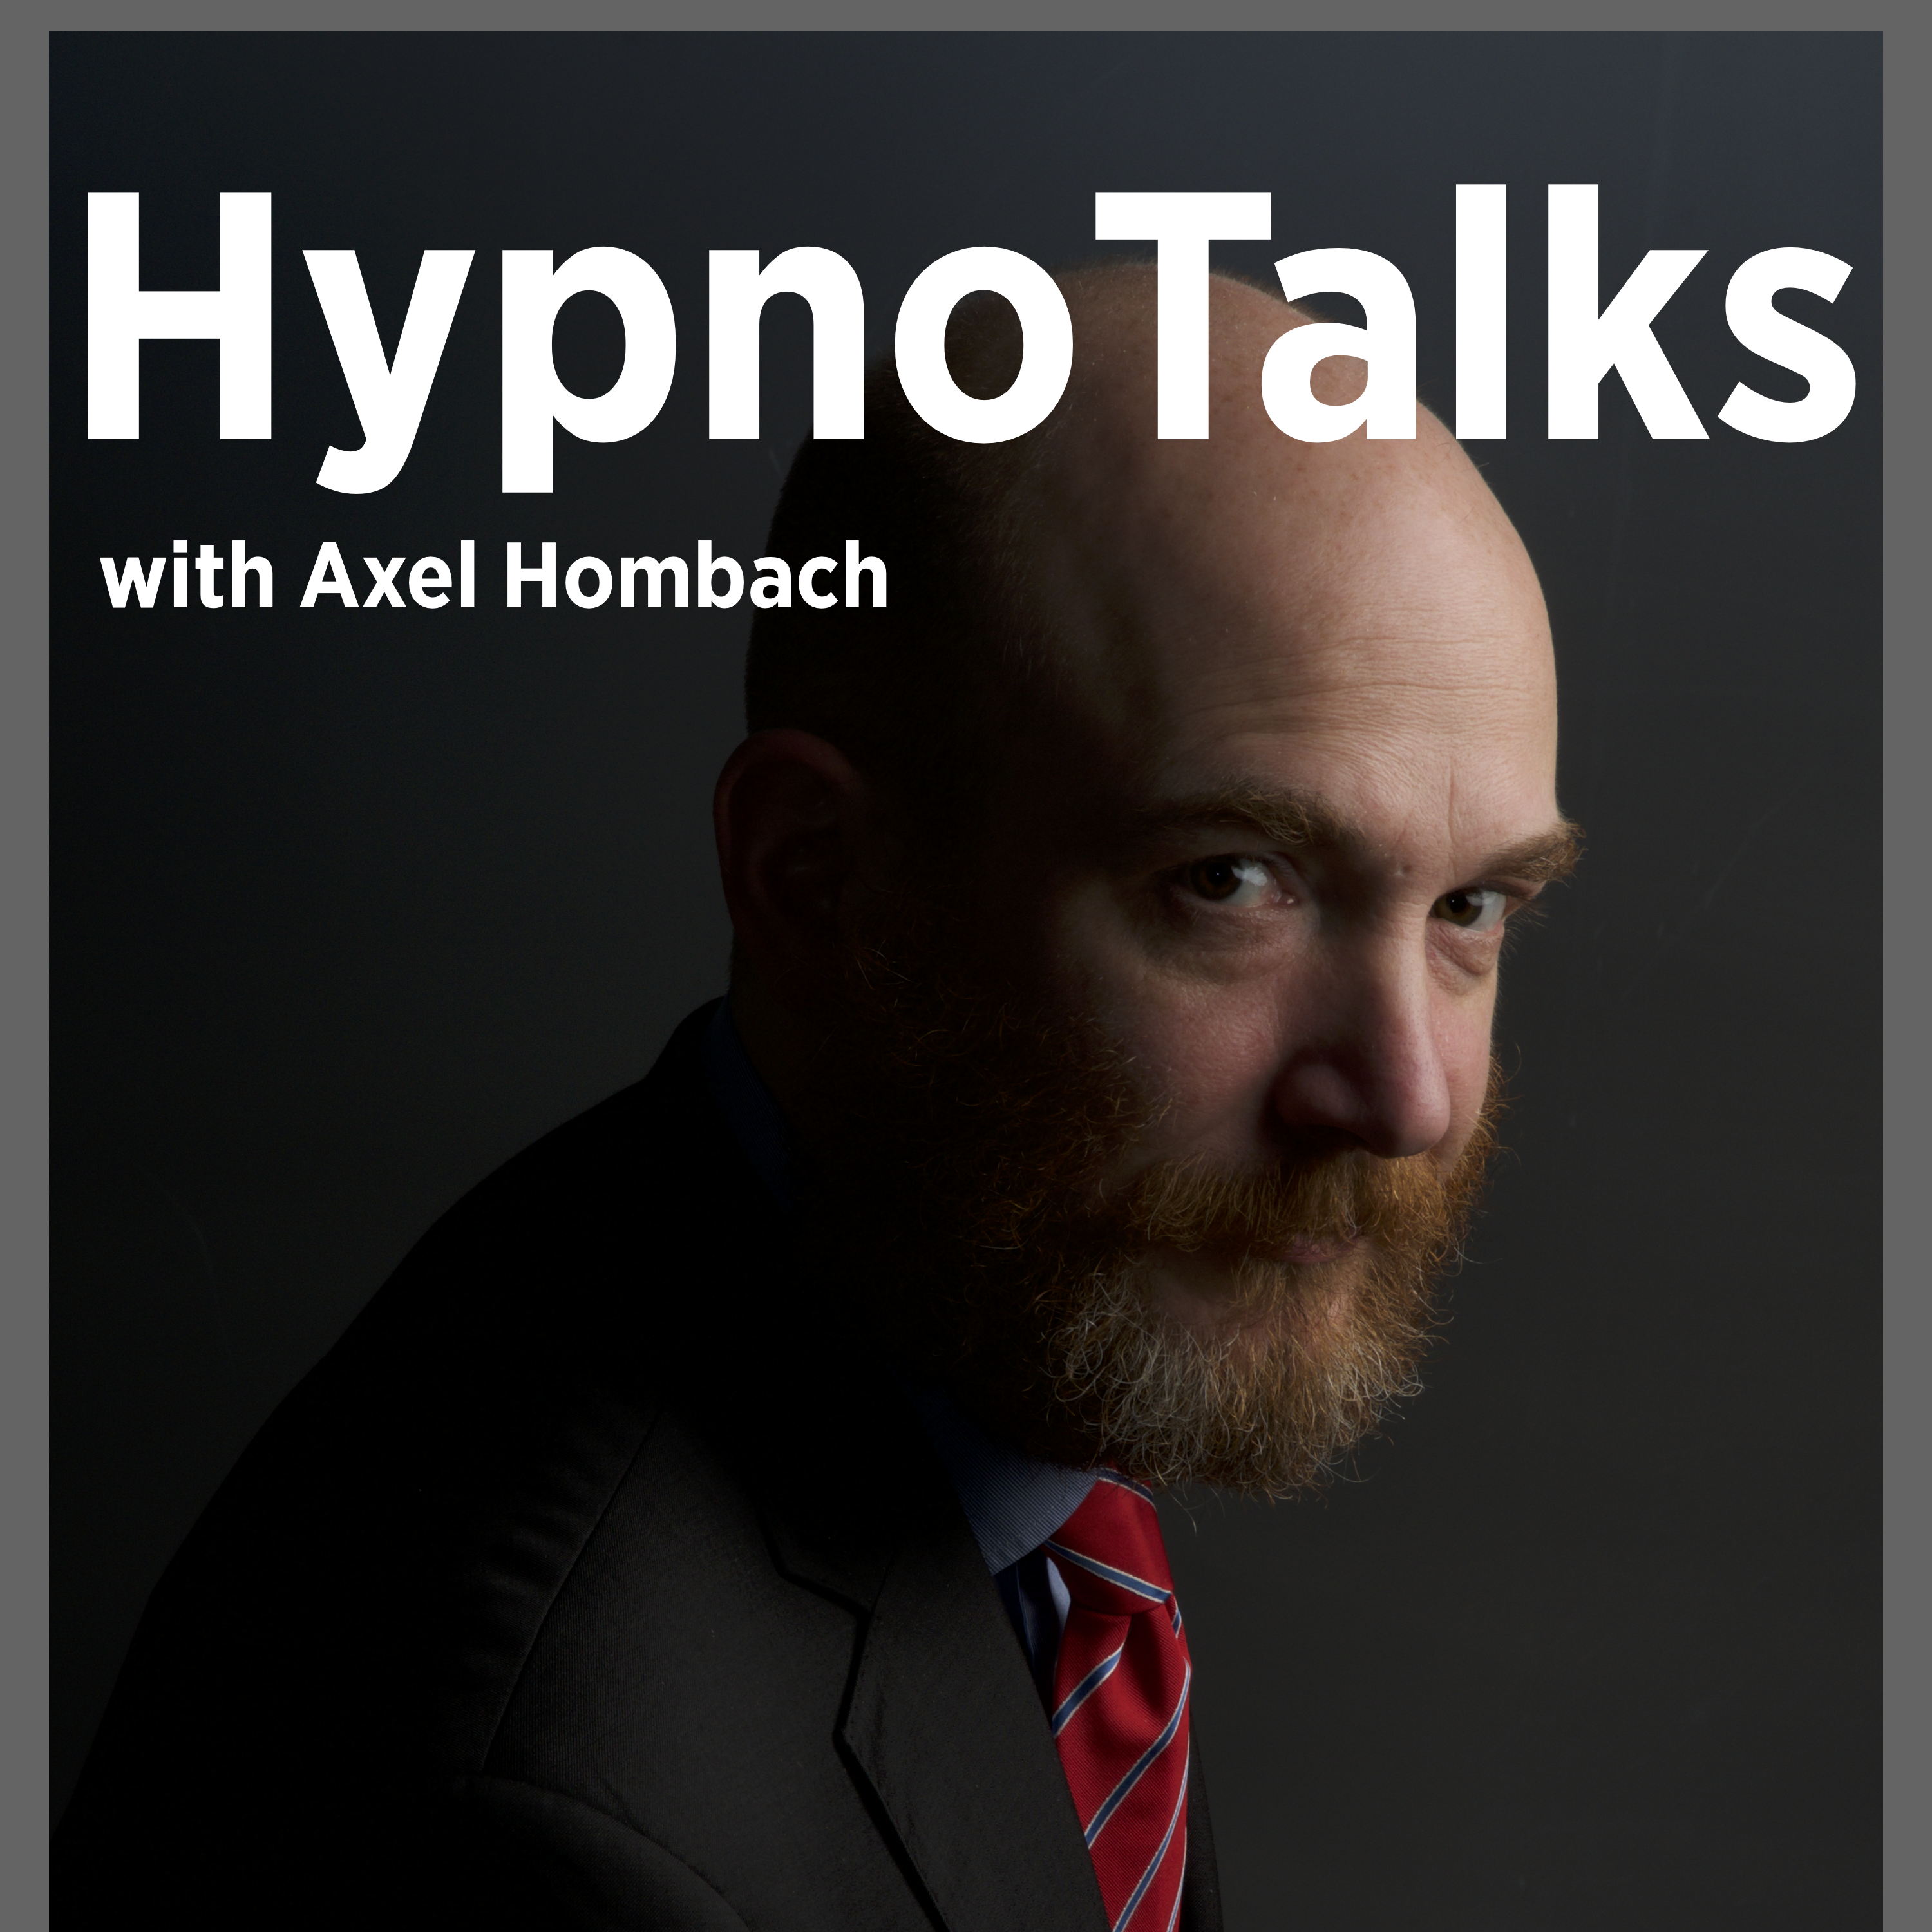 HypnoTalks with Axel Hombach